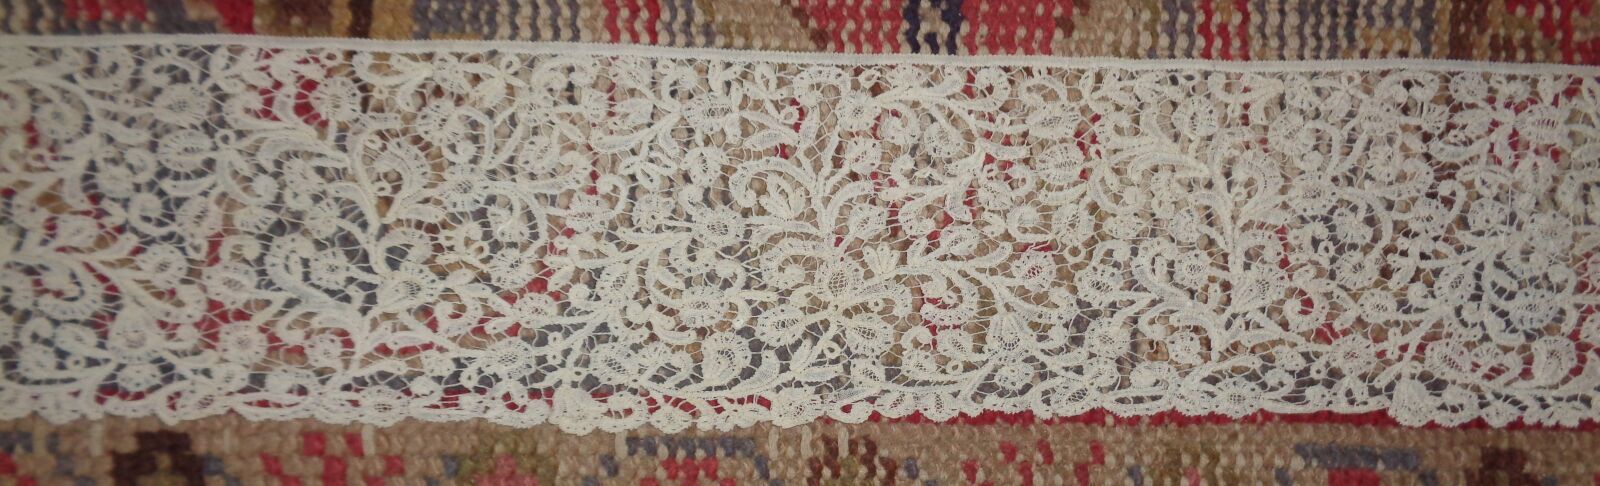 Null Lace ruffle in reticella, dense network of flowers.
2, 82 x 0, 12 m